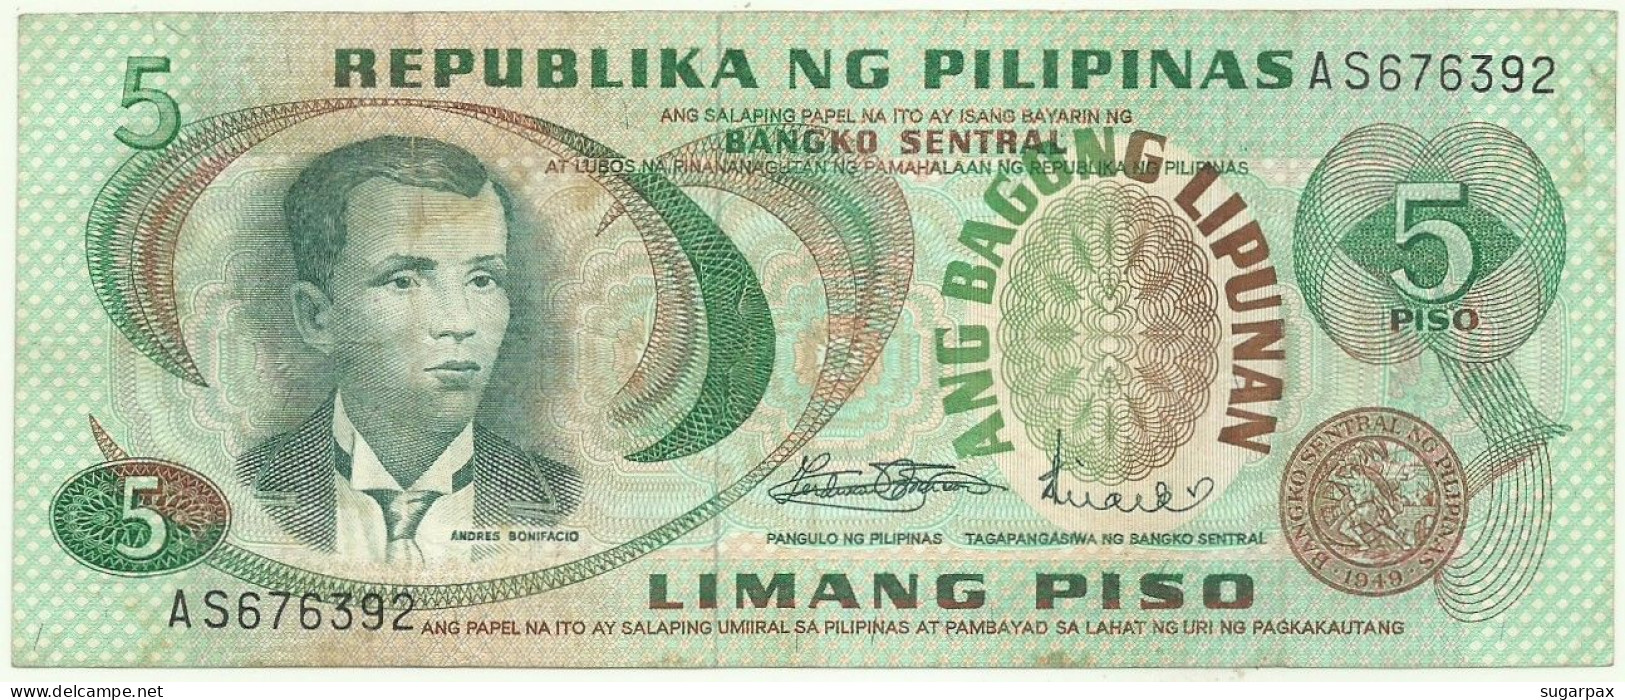 Philippines - 5 Piso - ND ( 1970s ) - Pick 153 - Sign. 8 - Serie AS - ANG BAGONG LIPUNAN ( 1974 - 1985 ) - Philippines